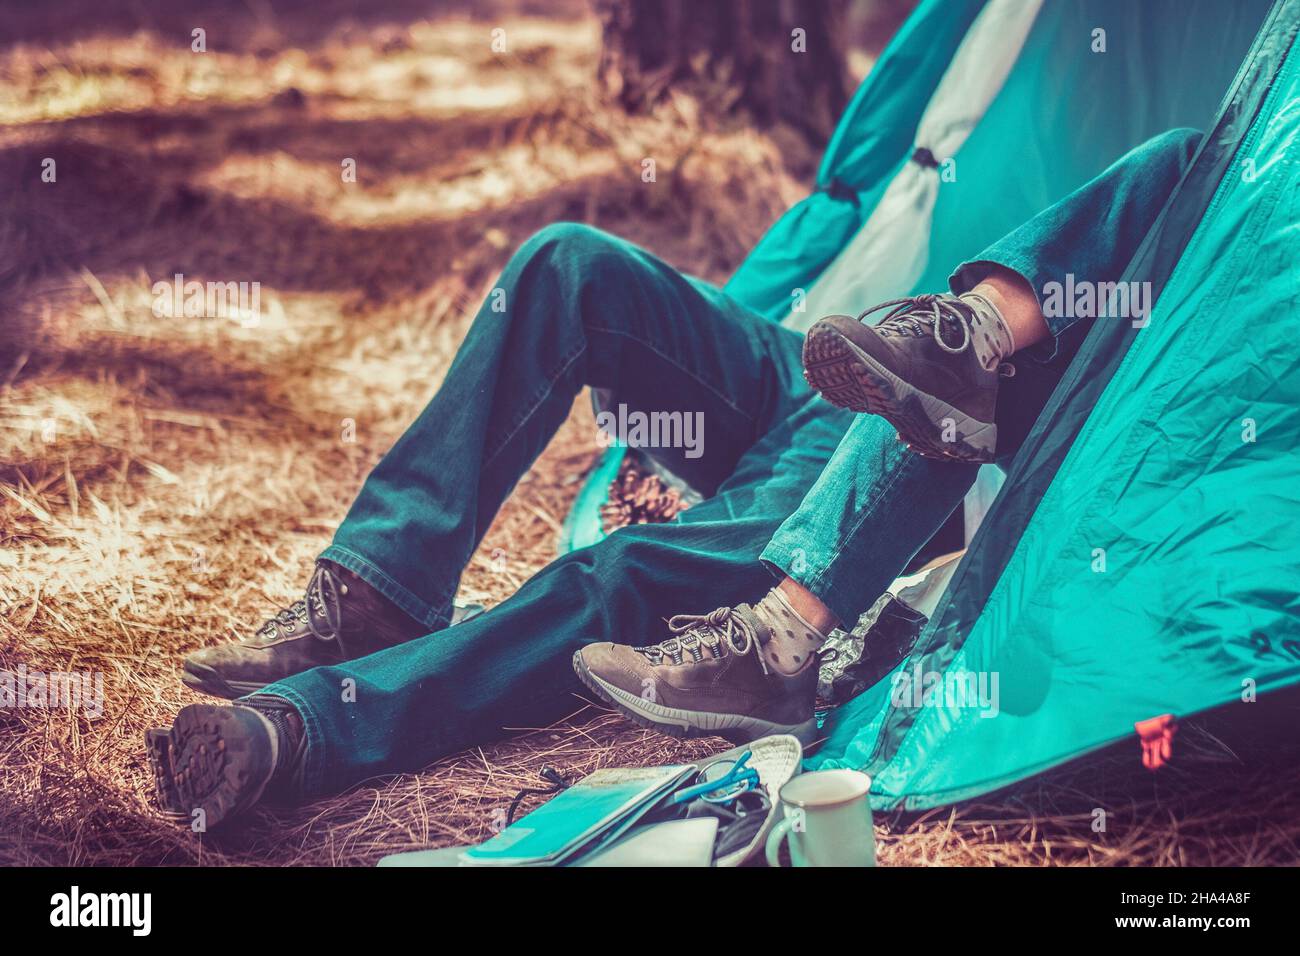 couple inside a tent in outdoor free woods camping activity - mountain trekking shoes and alternative adventure forest lifestyle people - free tourism vacation lifestyle people enjoying environment and nature Stock Photo